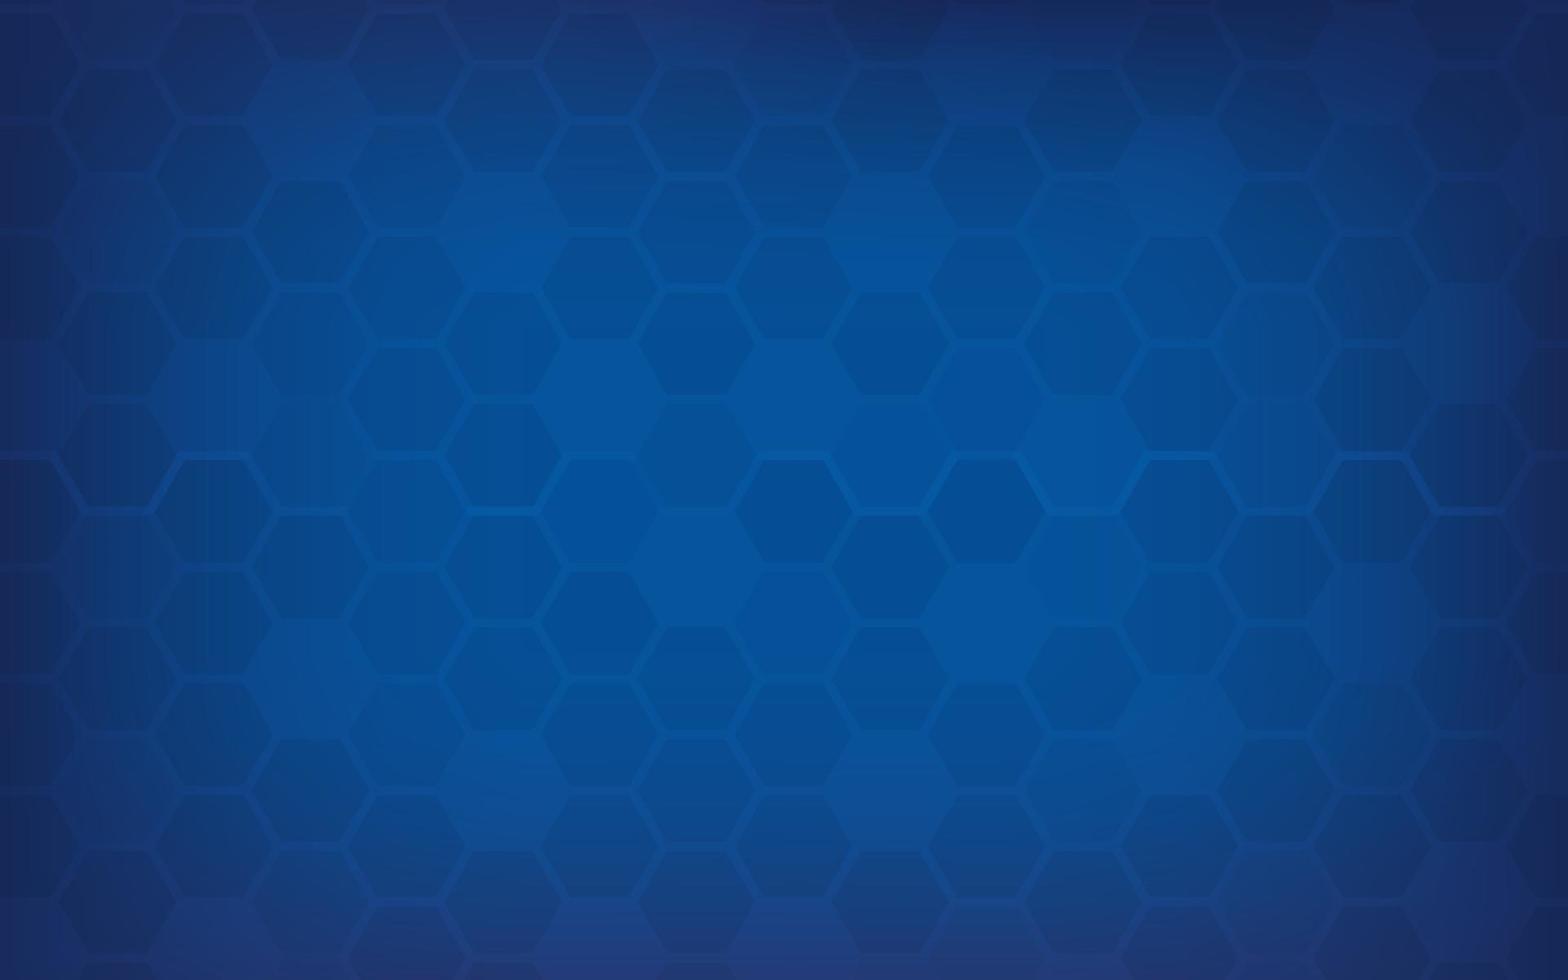 Blue honeycomb abstract background. Wallpaper and texture concept vector